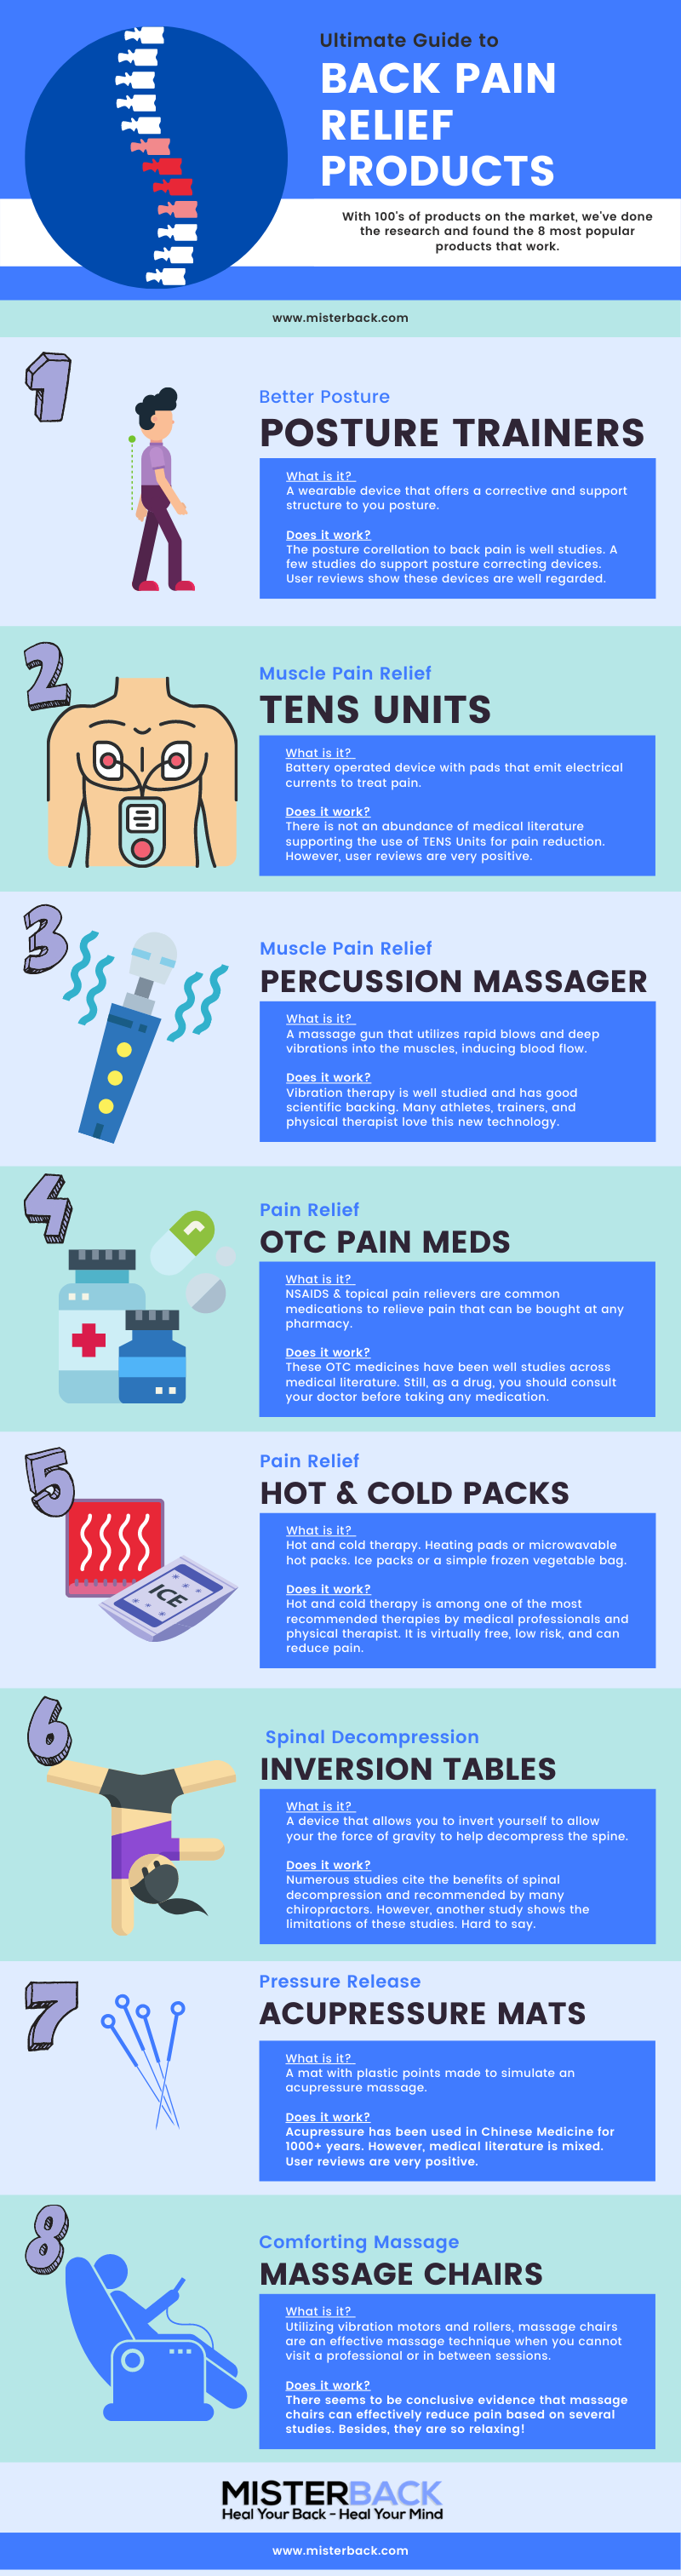 Ultimate Guide to Back Pain Relief Products Infographic